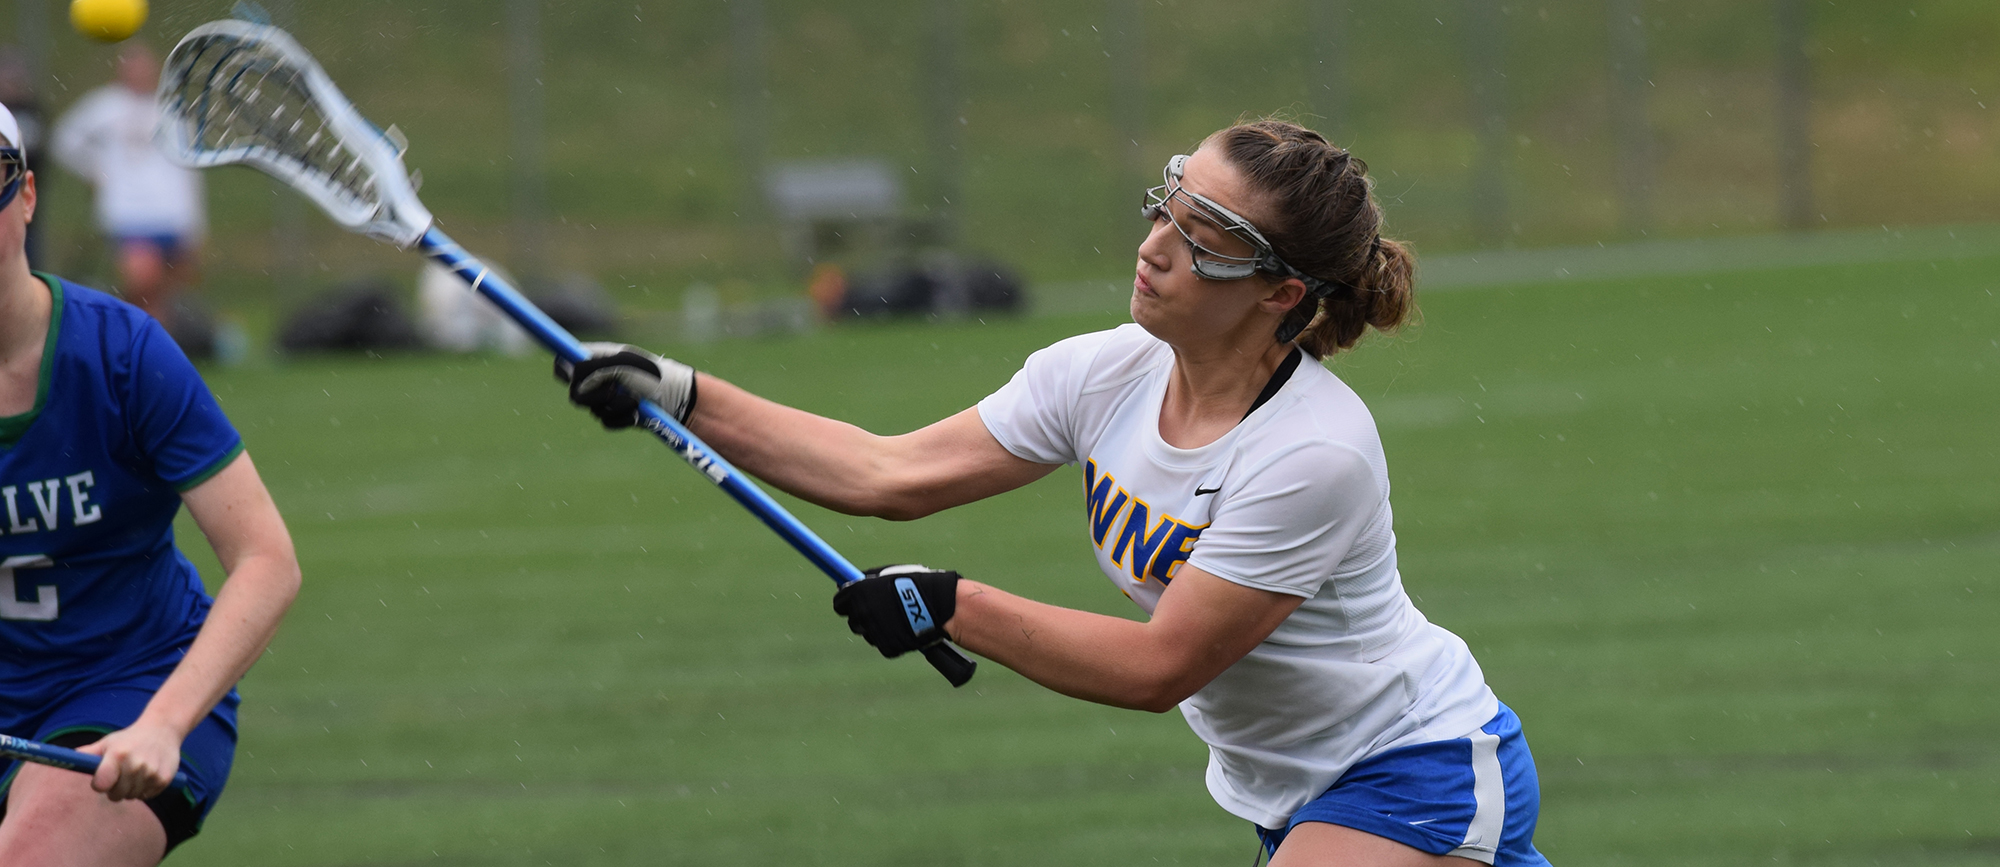 Junior Rachel Canning led the Golden Bears with a game-high six goals in Tuesday's loss to Salve Regina. (Photo by Rachael Margossian)